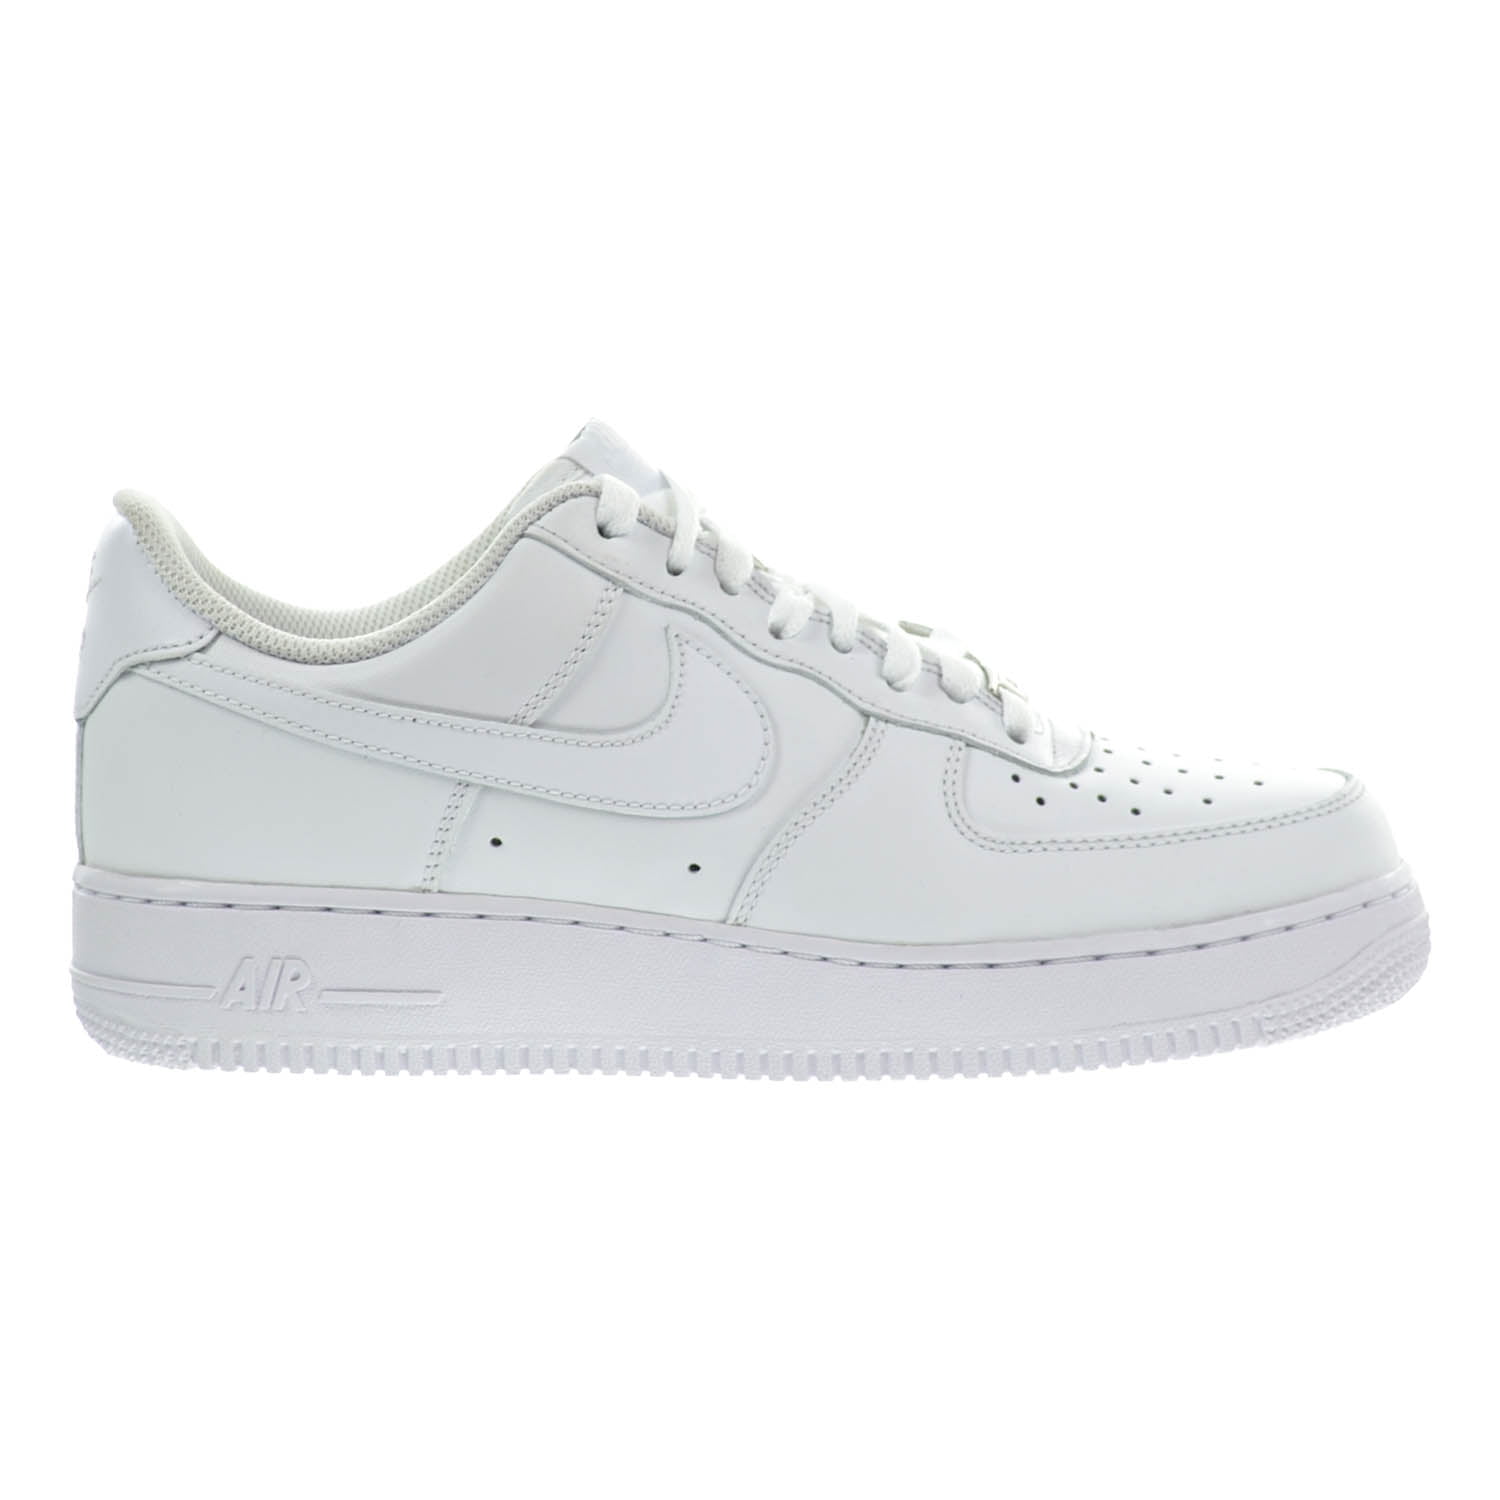 Thaw, thaw, frost thaw ink dish Nike Air Force 1 07 Men's Shoes White/White 315122-111 (7 D(M) US) -  Walmart.com